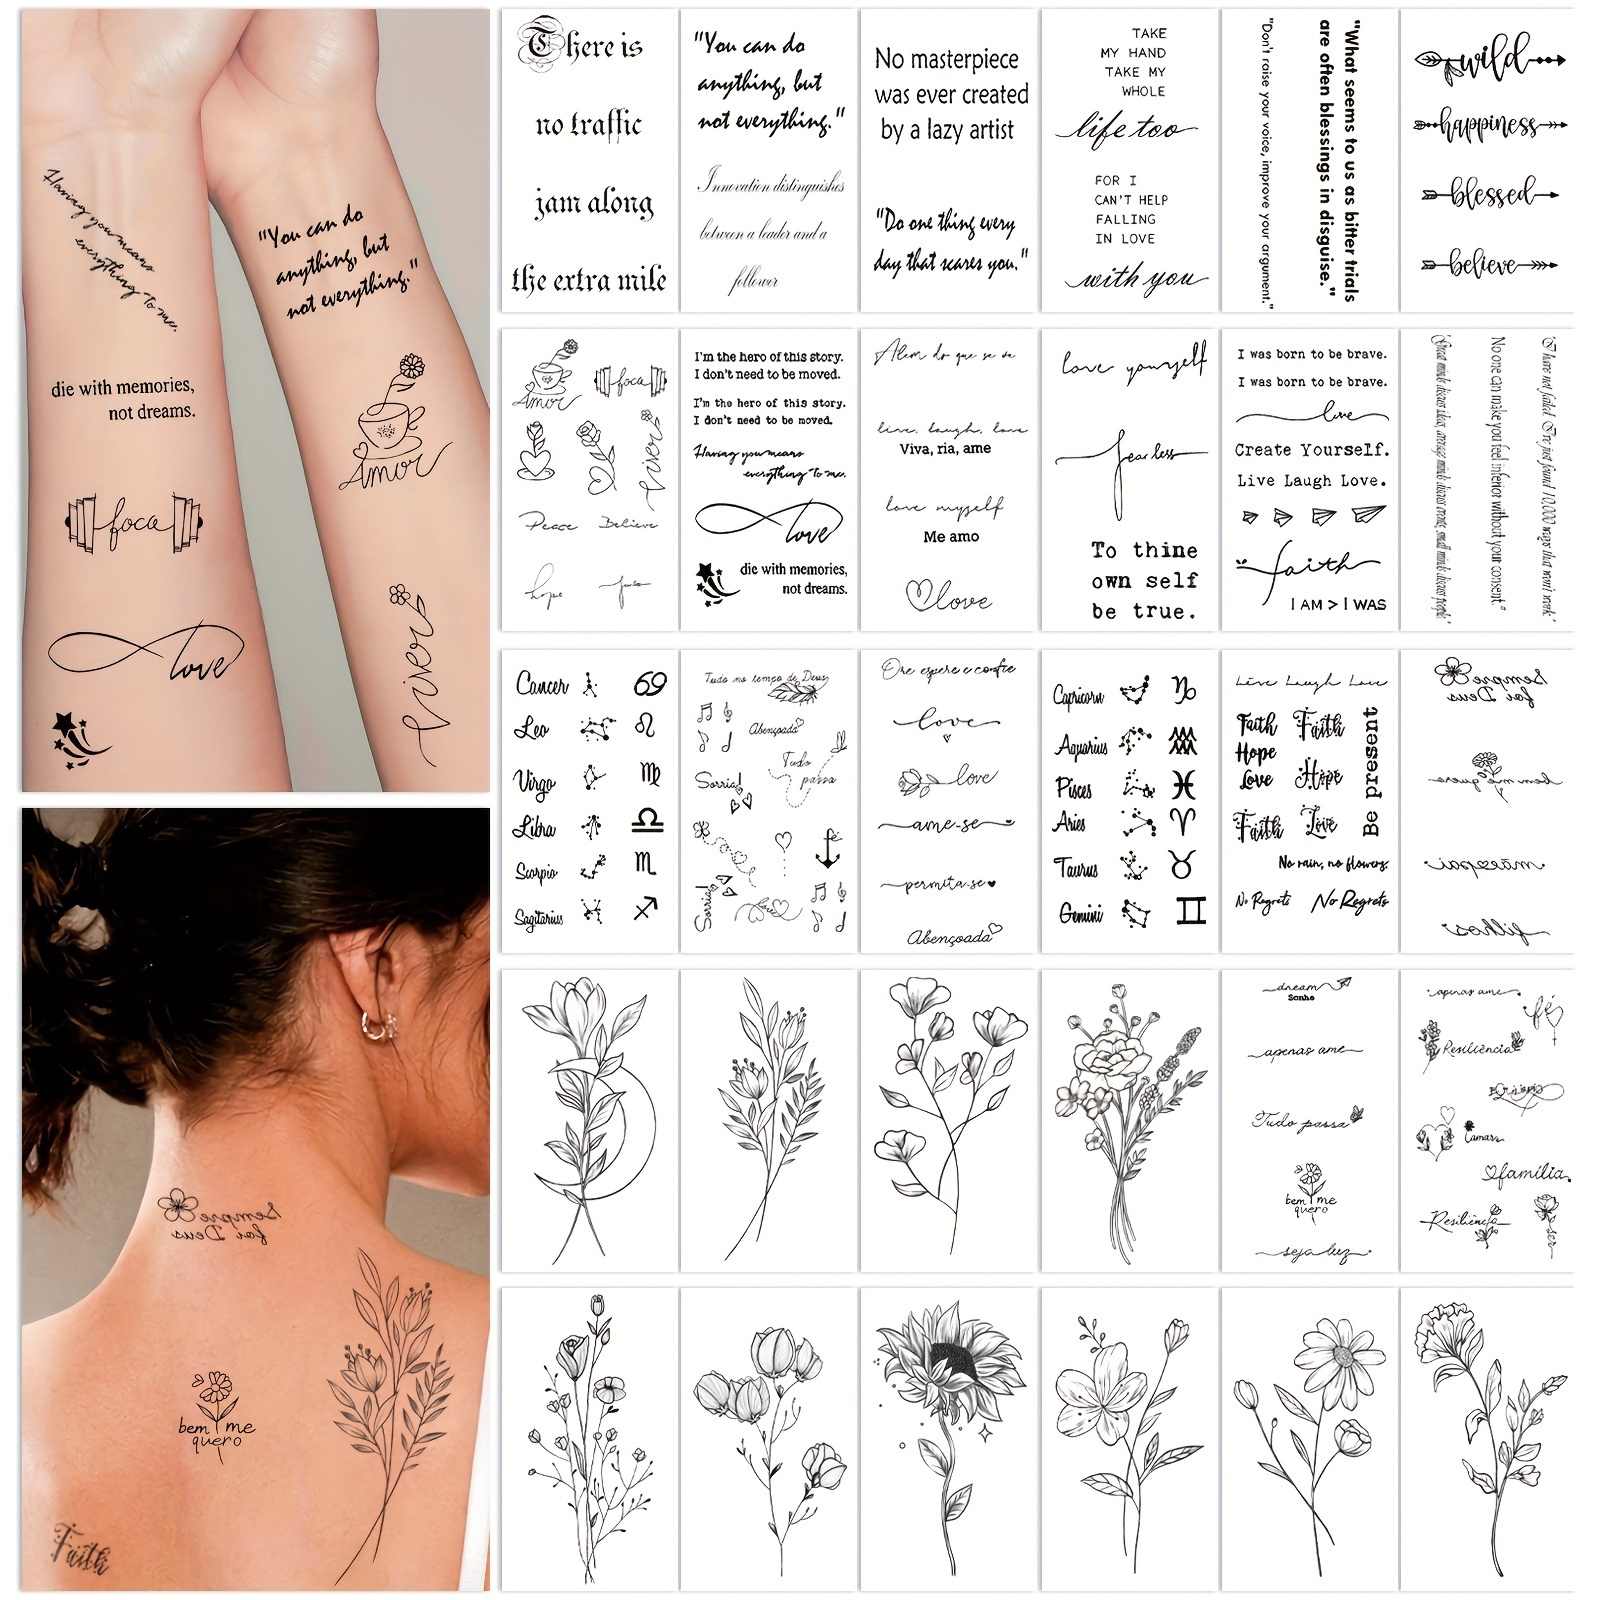 

30 Sheets Small Temporary Tattoos For Women Men Neck Hands Finger, Slogan Flower Fake Tattoo Stickers, Waterproof And Long-lasting, Realistic Black Tattoos Sticker, Teenage Stuff